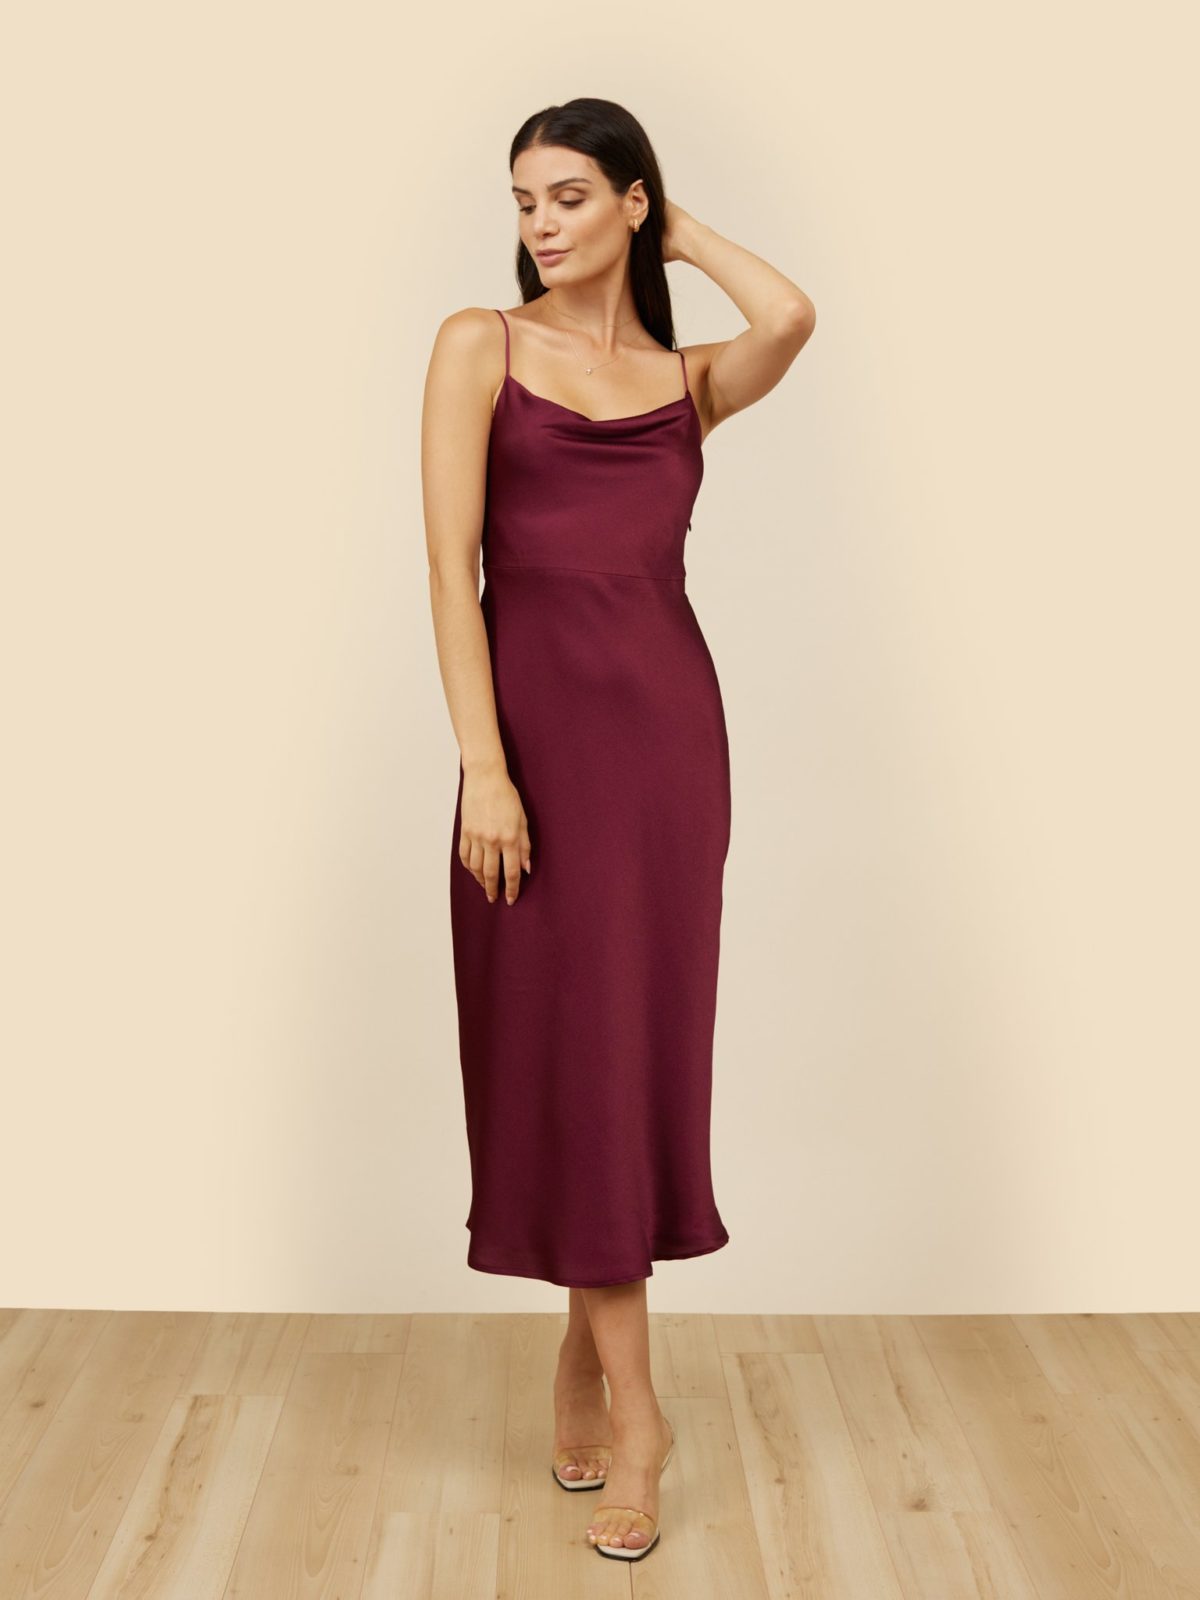 Bridesmaids Dresses for Fall in burgundy hues